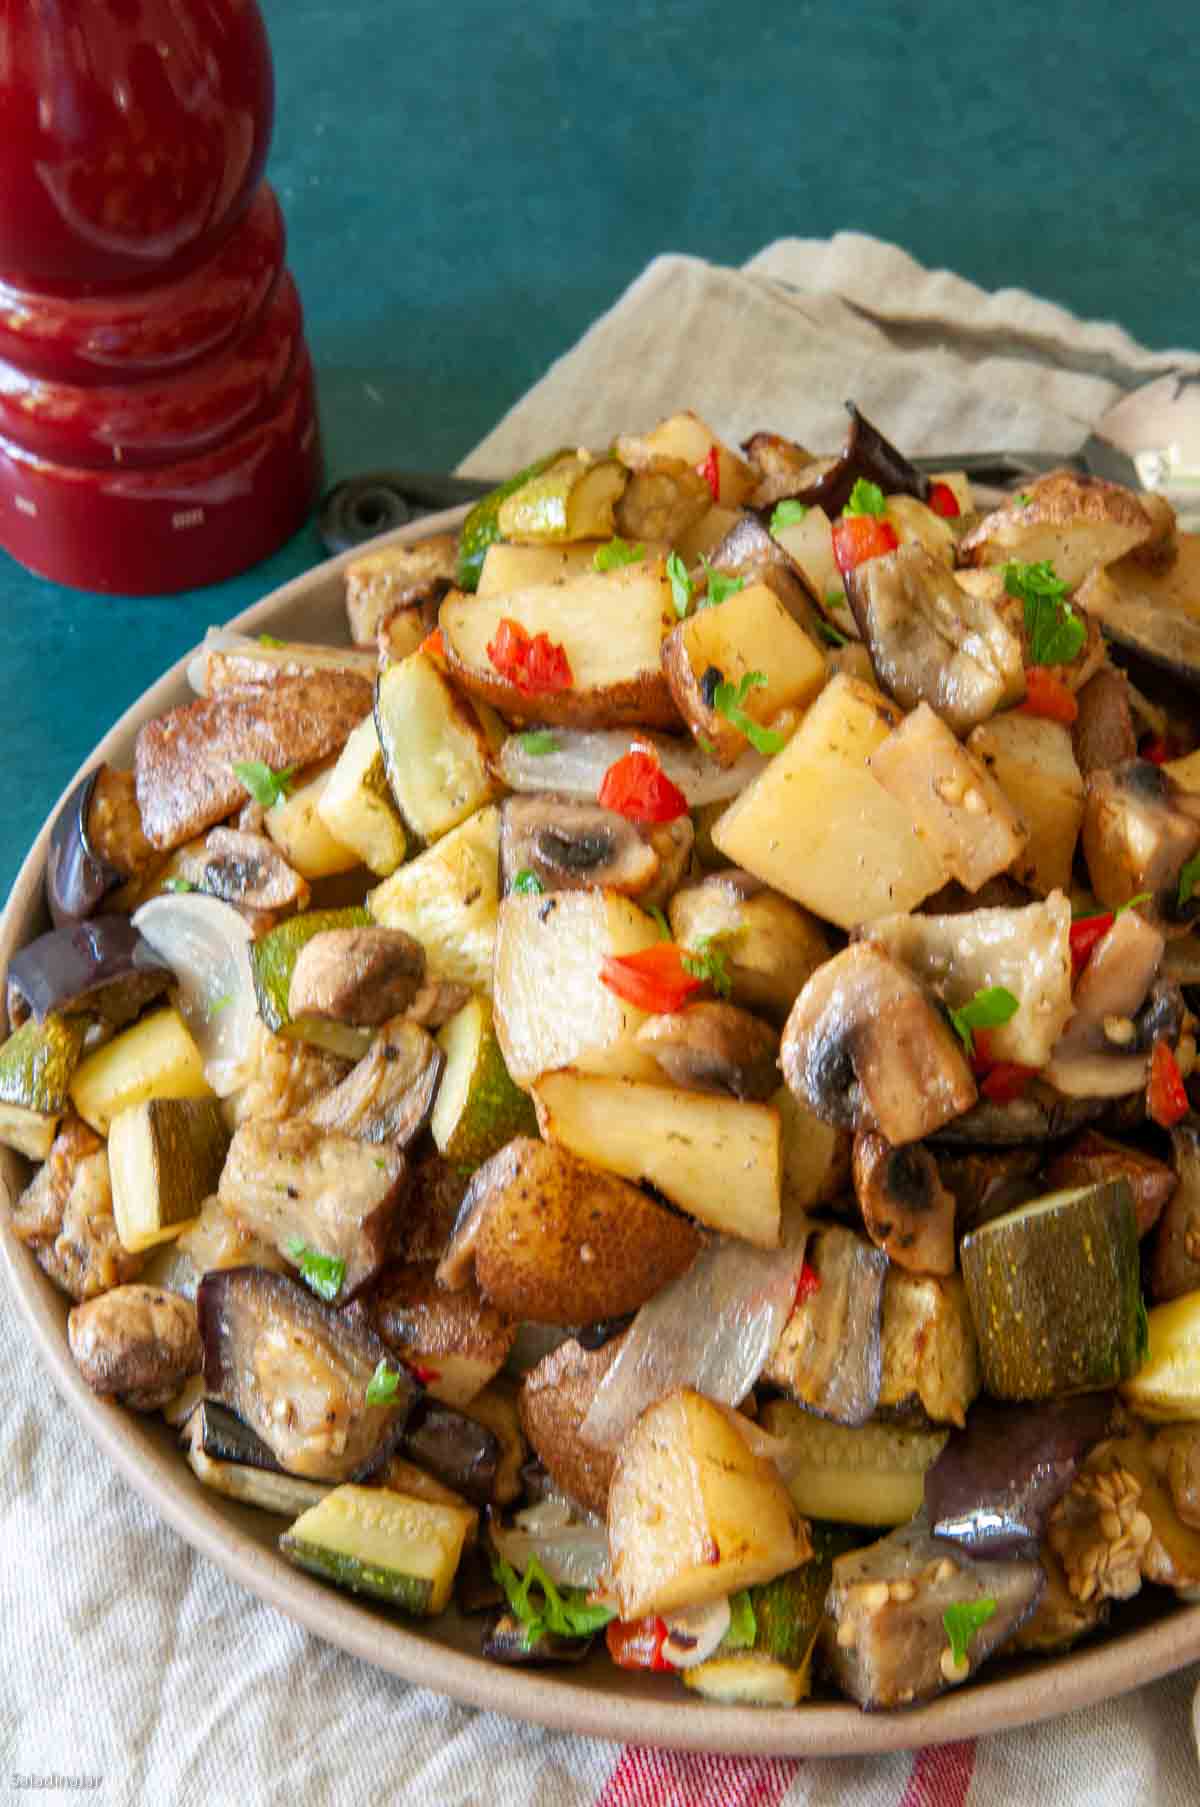 roasted eggplant and potatoes with zucchini and mushrooms garnished with parsley and red peppers